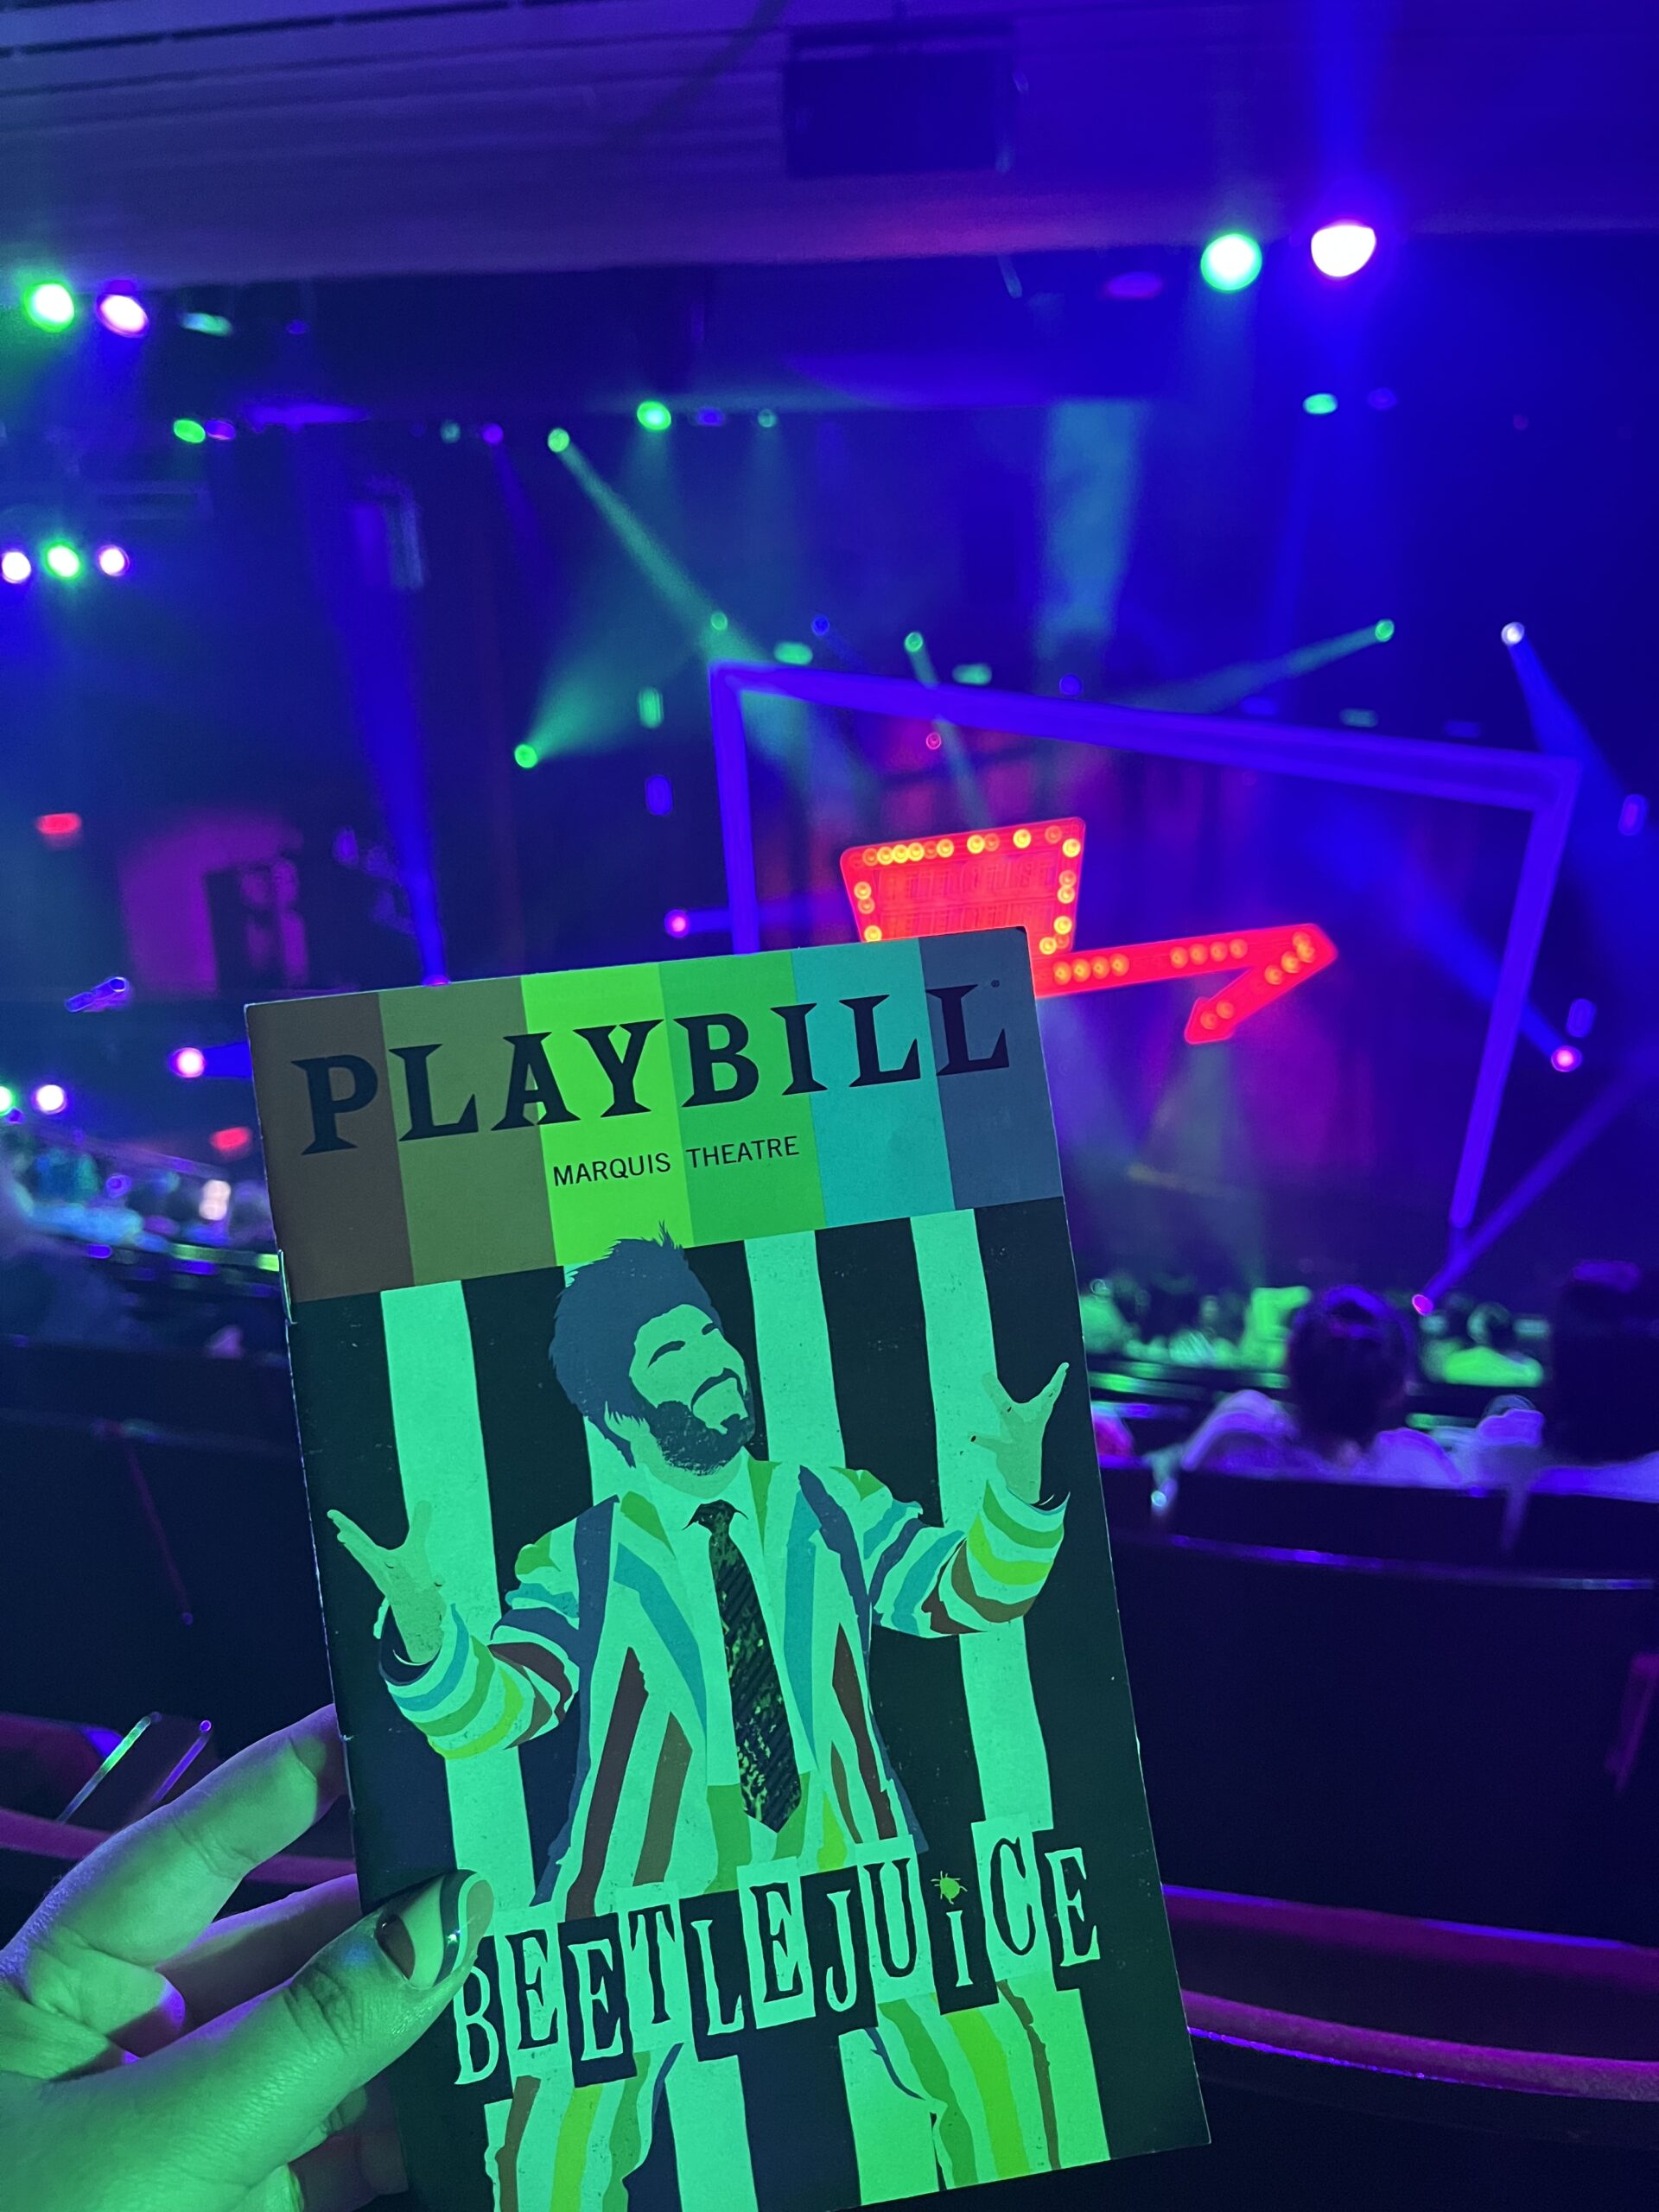 Beetlejuice Playbill in a theatre